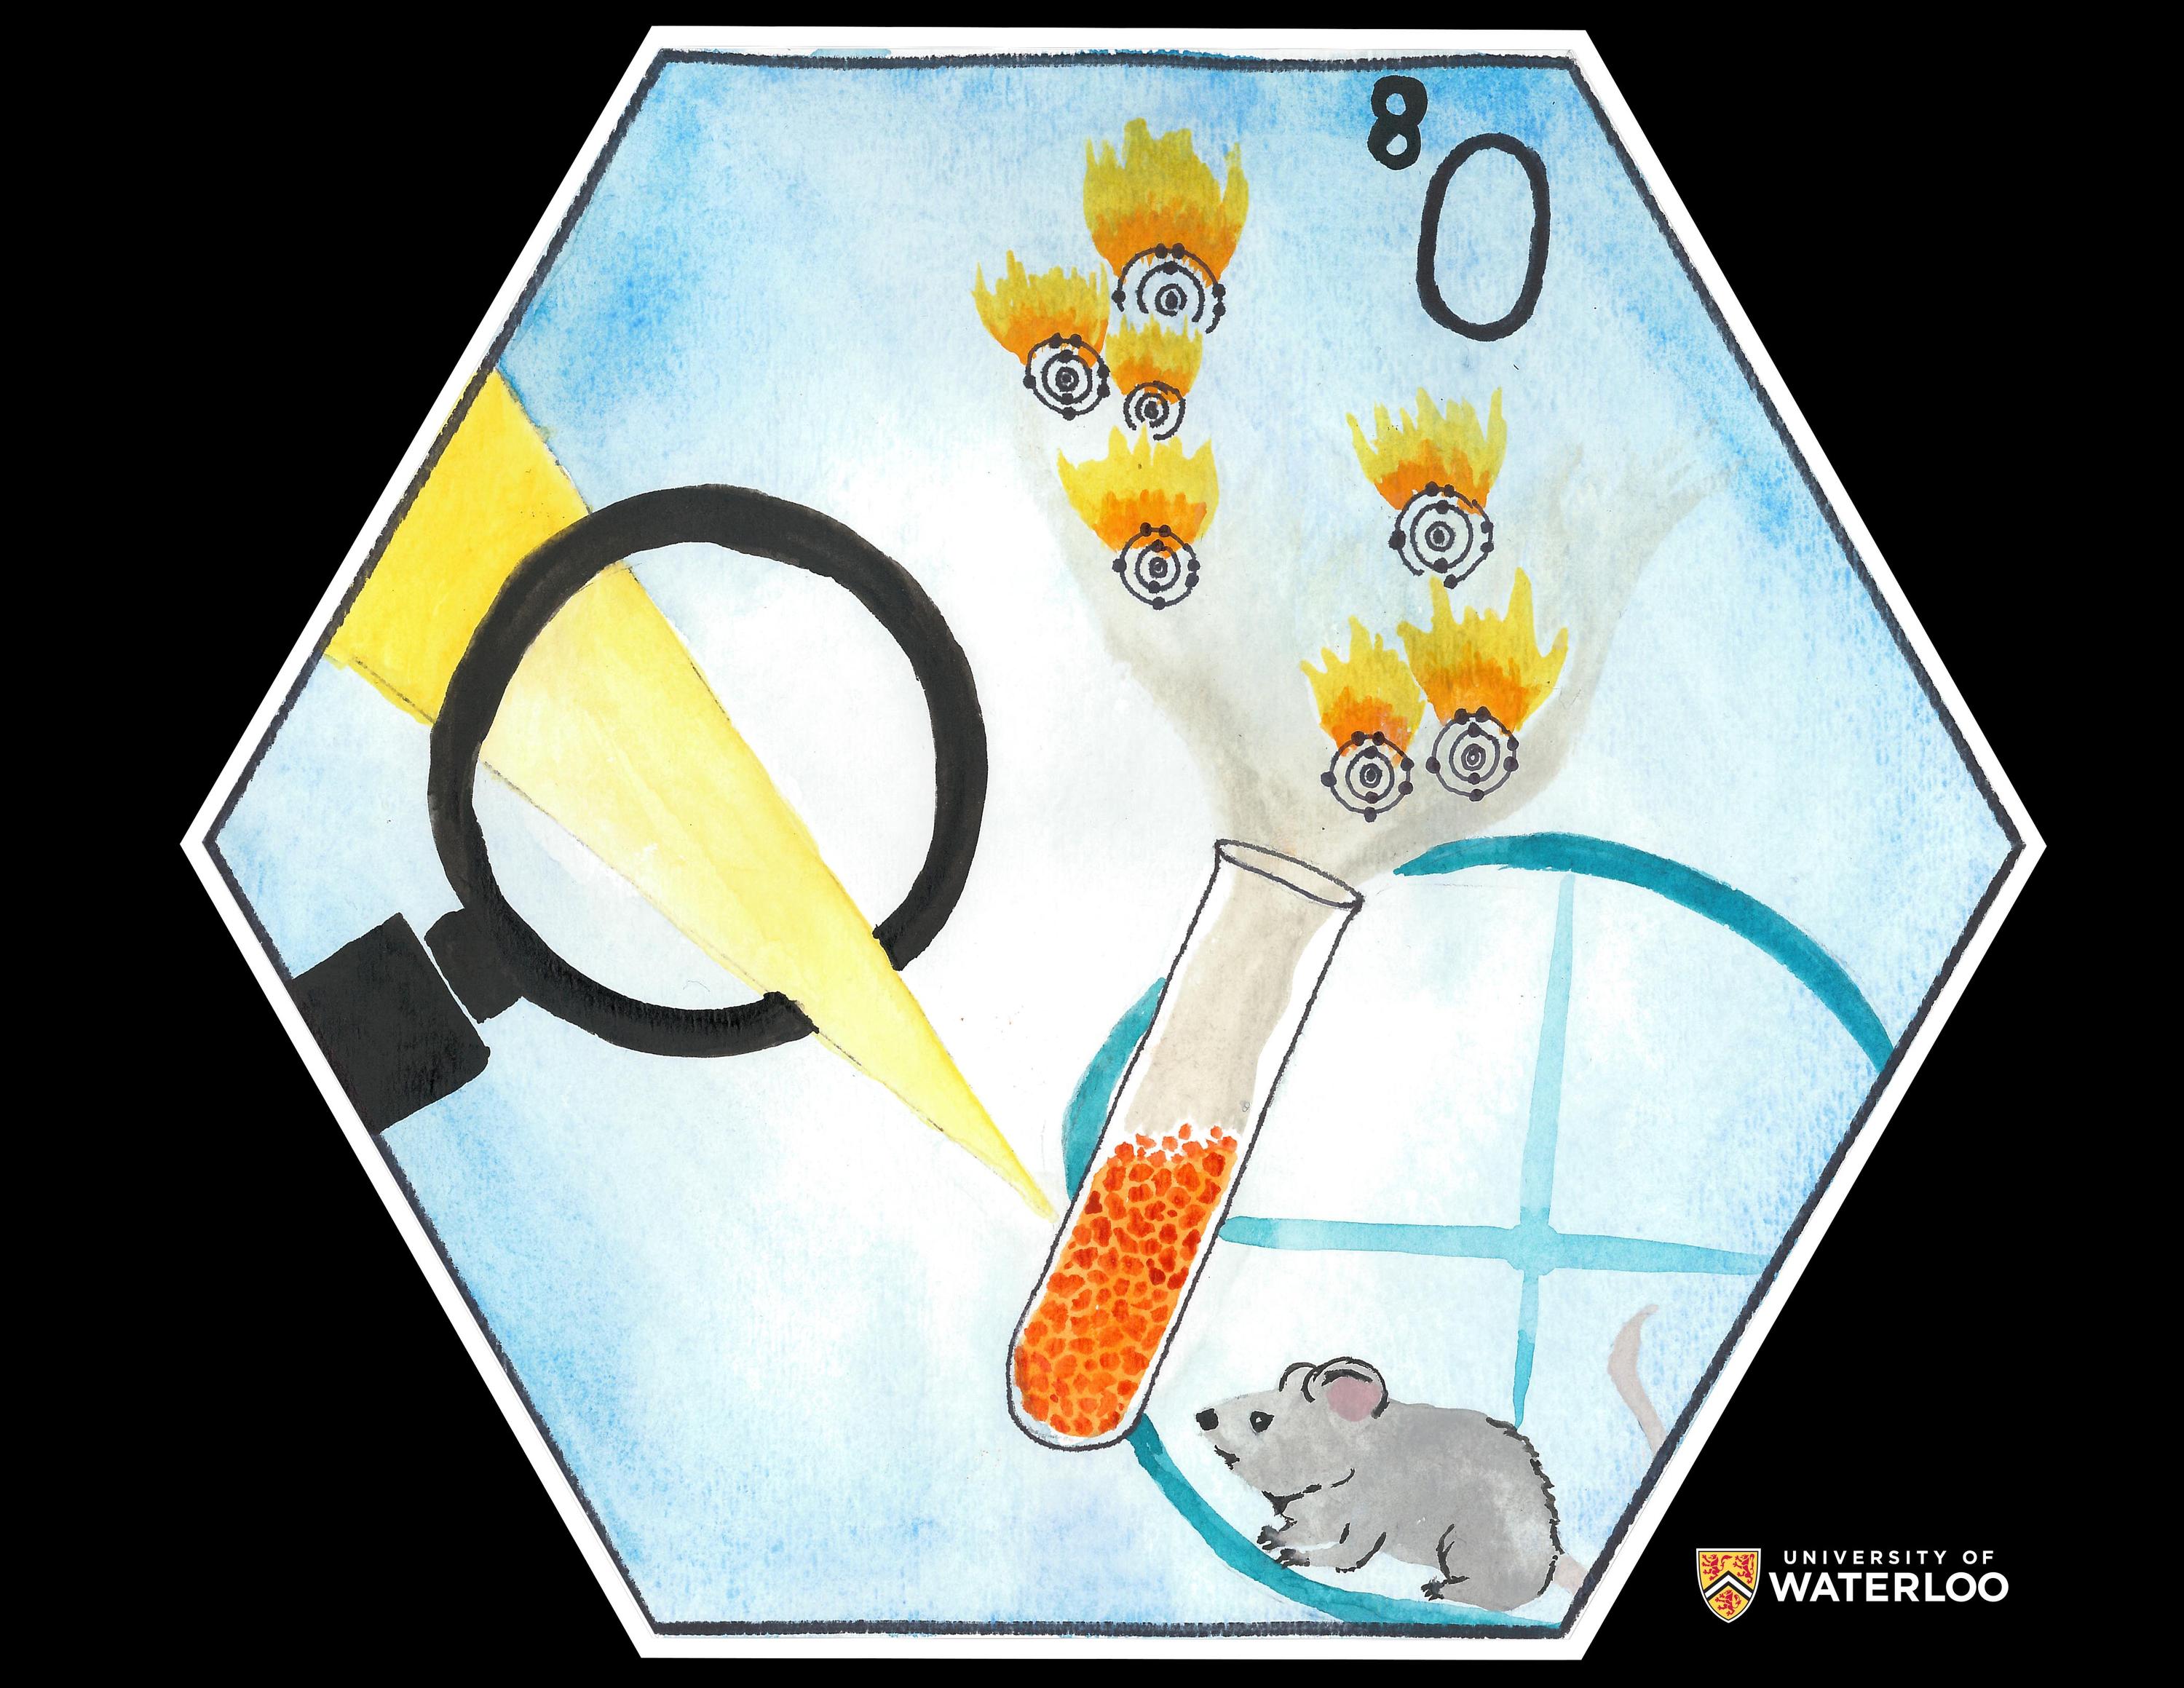 Watercolor. One of the first experiments used to isolate oxygen. Sunlight heats a vial containing mercury (III) oxide which produces oxygen gas illustrated by tiny atomic Bohr models in flames. Mouse runs on an exercise wheel in the background.